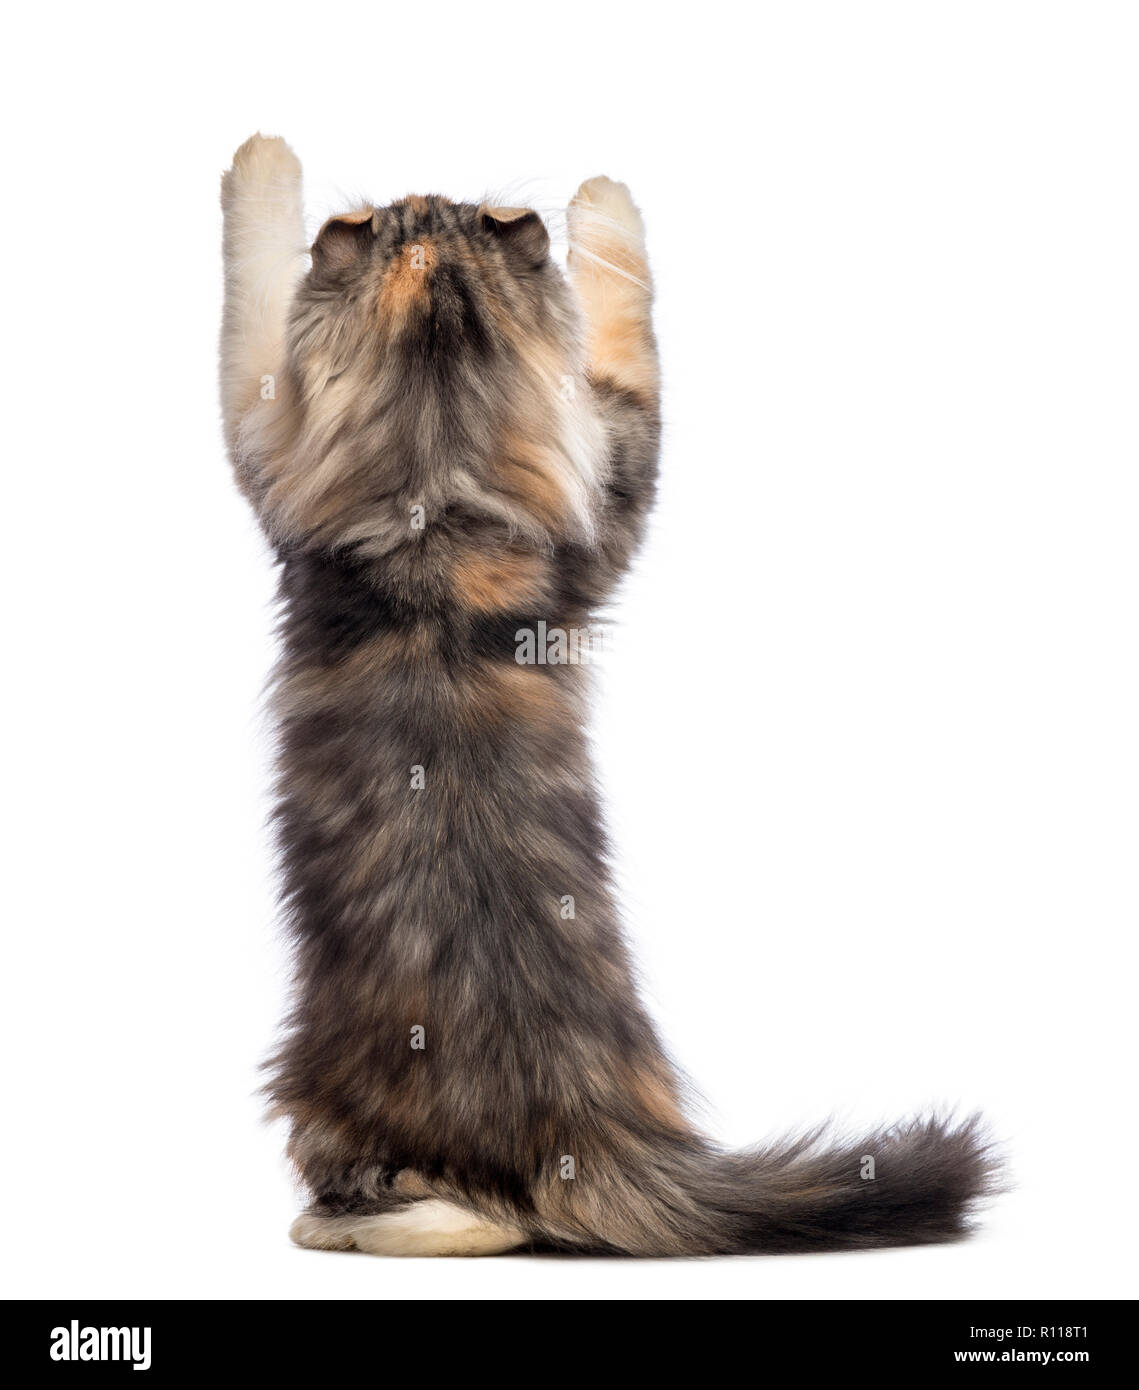 Rear view of an American Curl kitten, 3 months old, standing on hind legs and reaching in front of white background Stock Photo